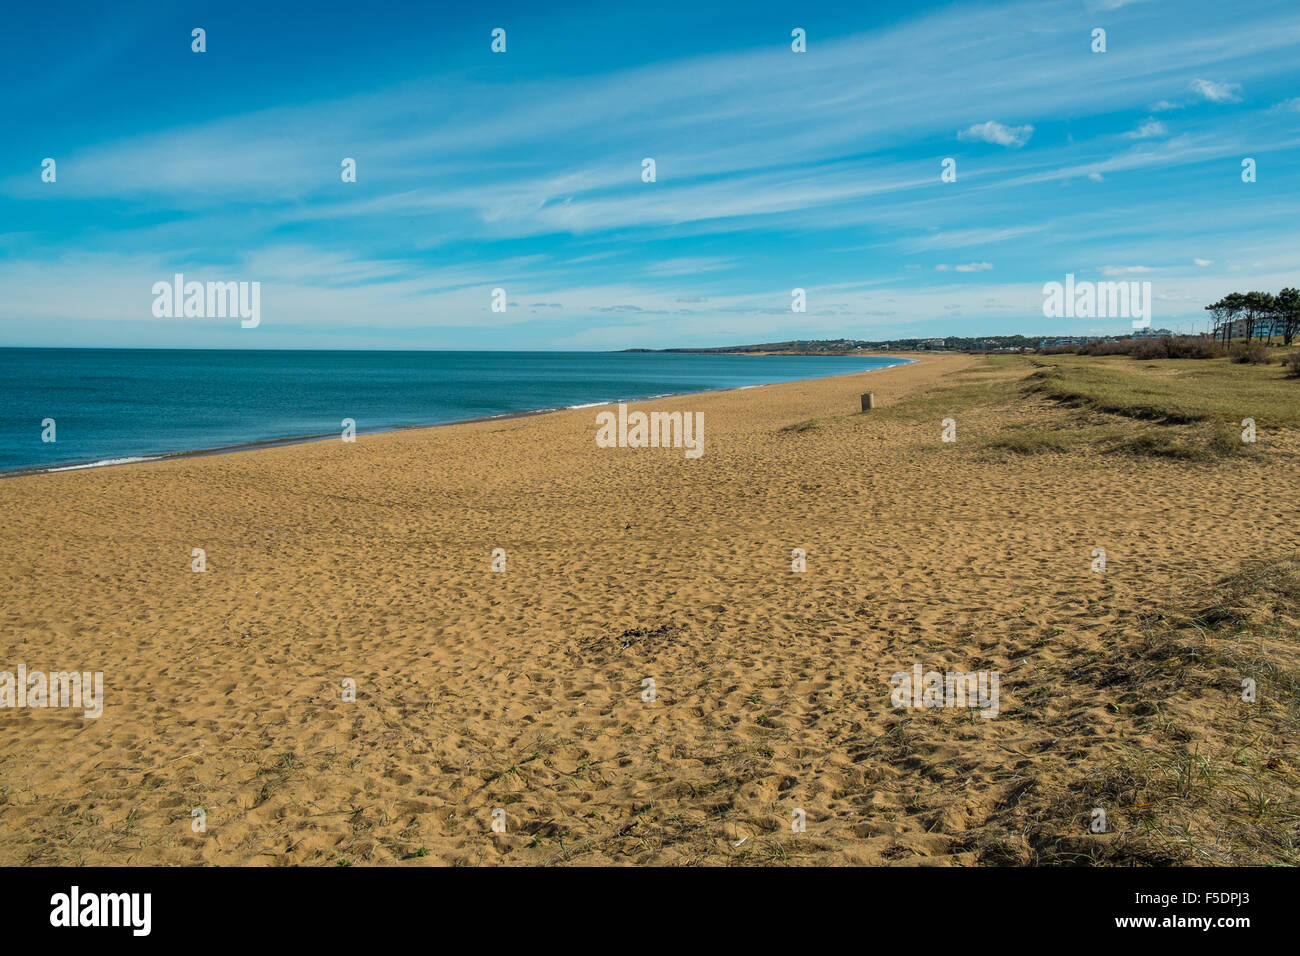 Punta del Este bay and its large sandy beach Stock Photo